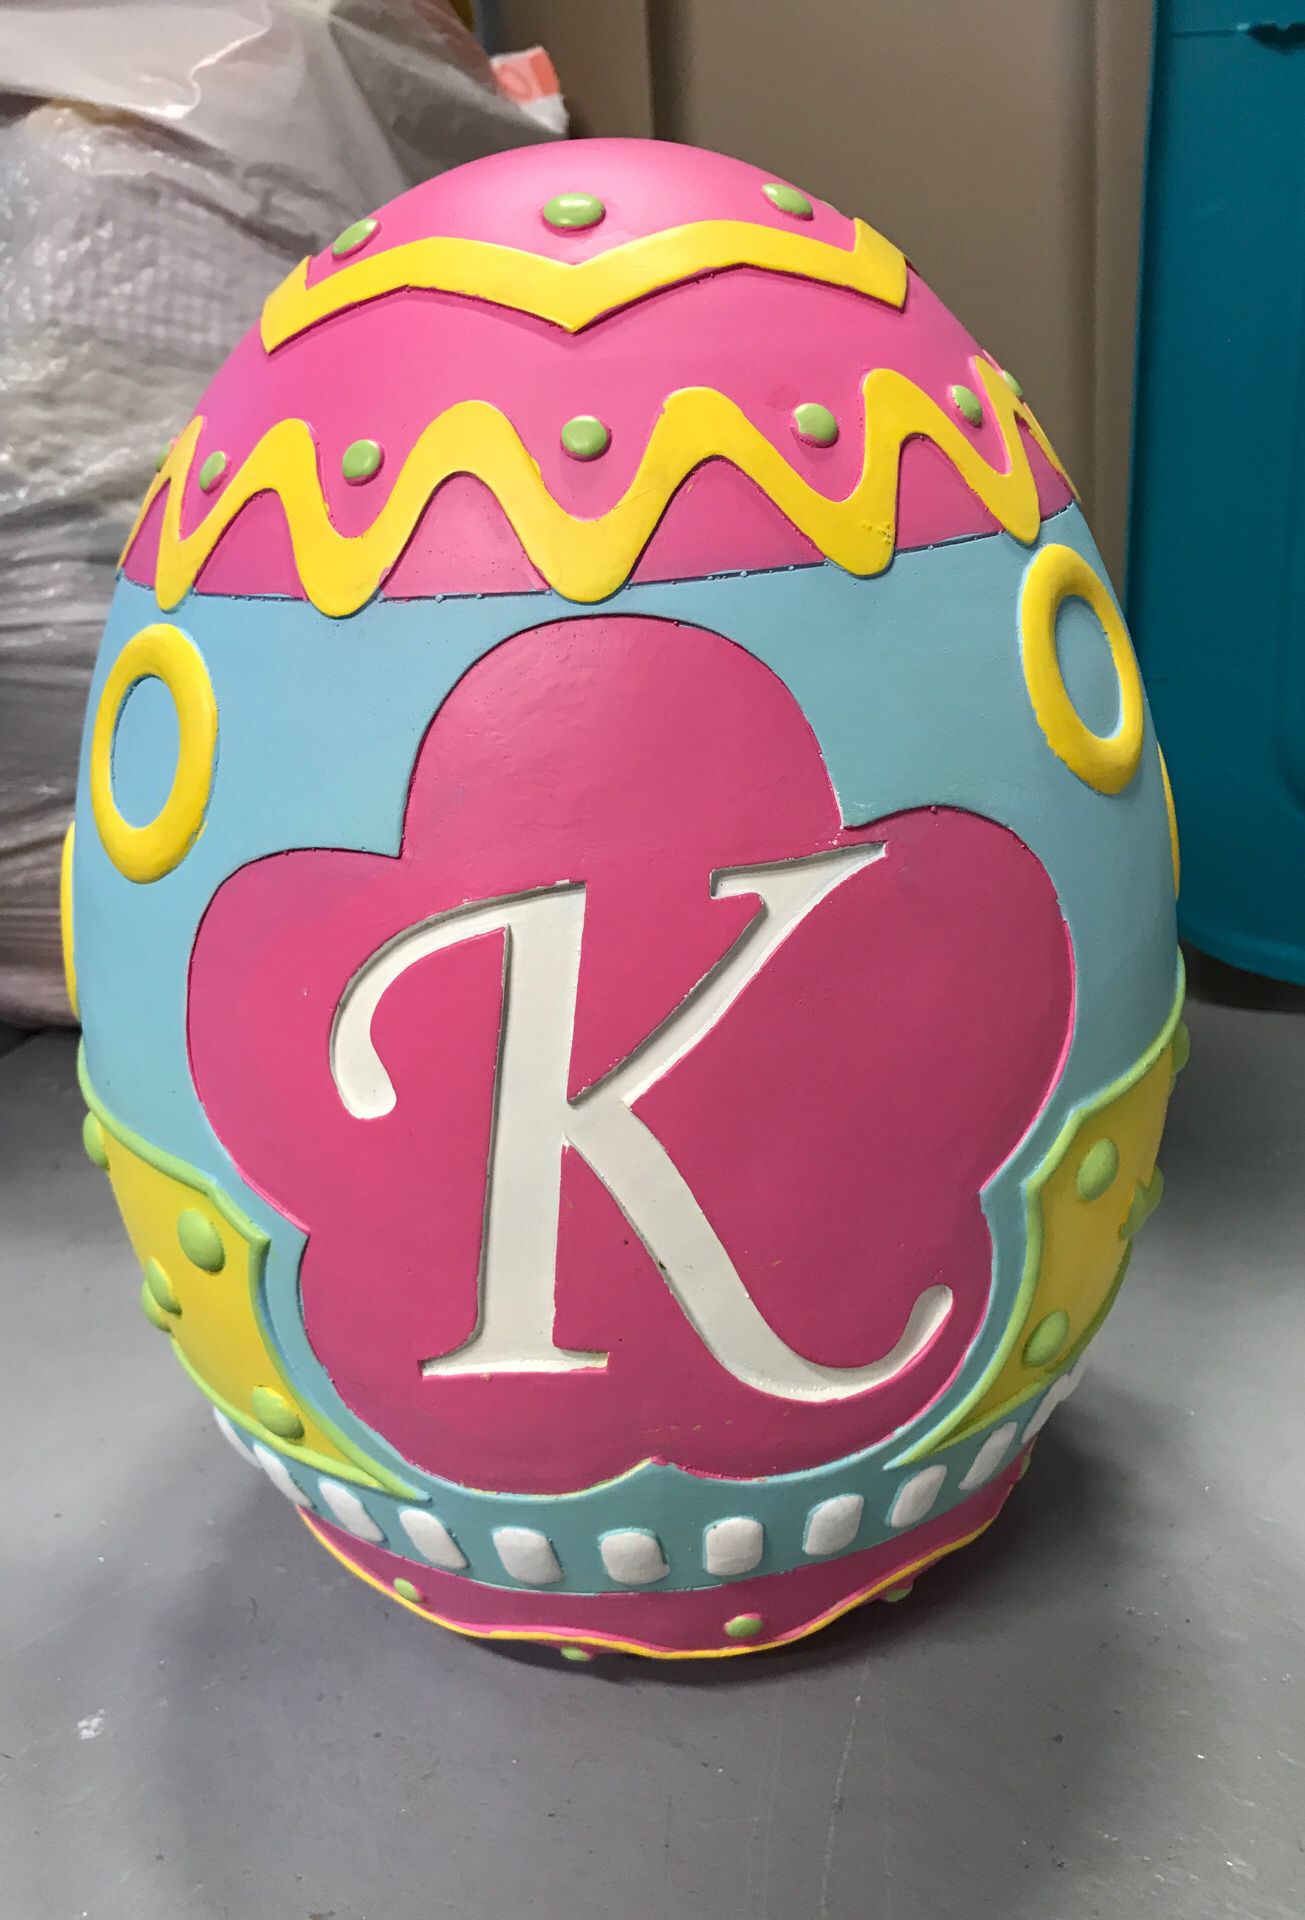 Big ceramic Easter egg with the letter “K” on it